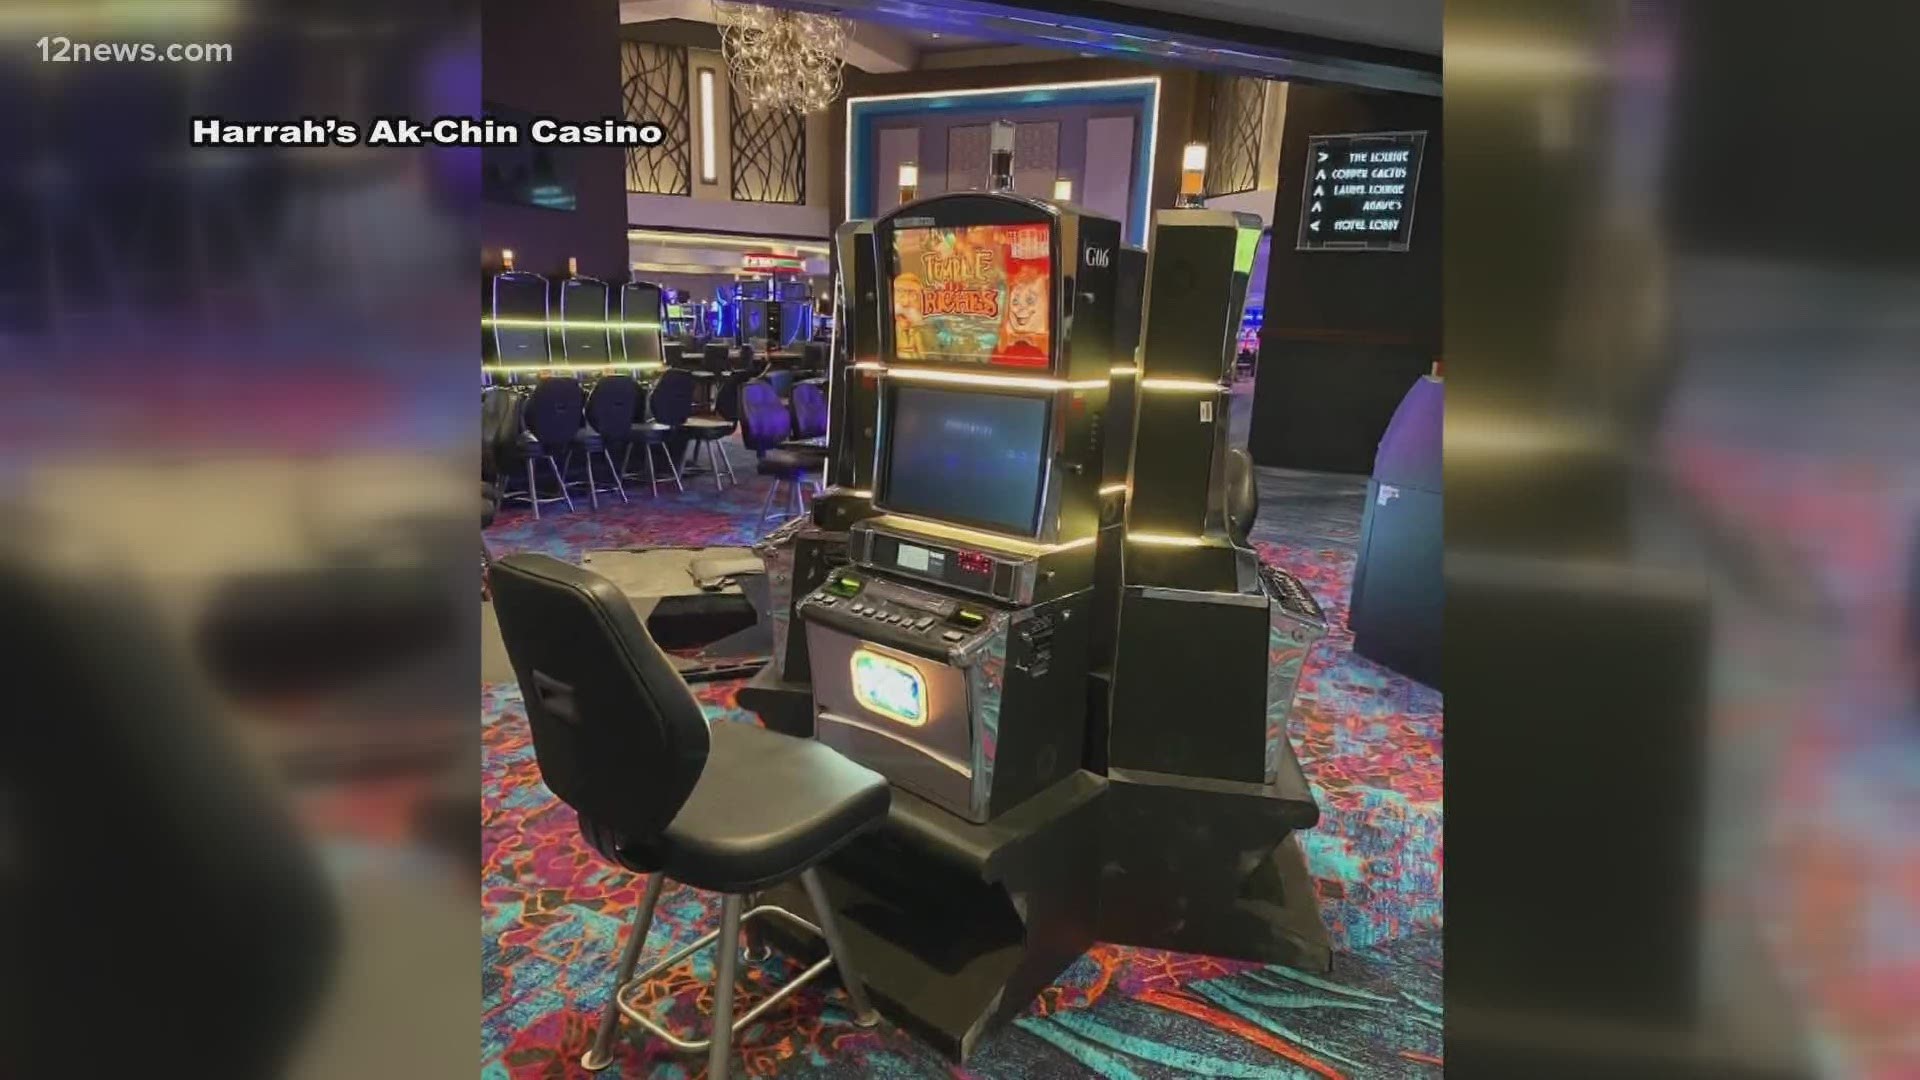 Ft McDowell, Harrah's Ak-Chin Casino and Gila River Hotels and Casinos all say they plan to reopen Friday. The rest plan to stay closed.